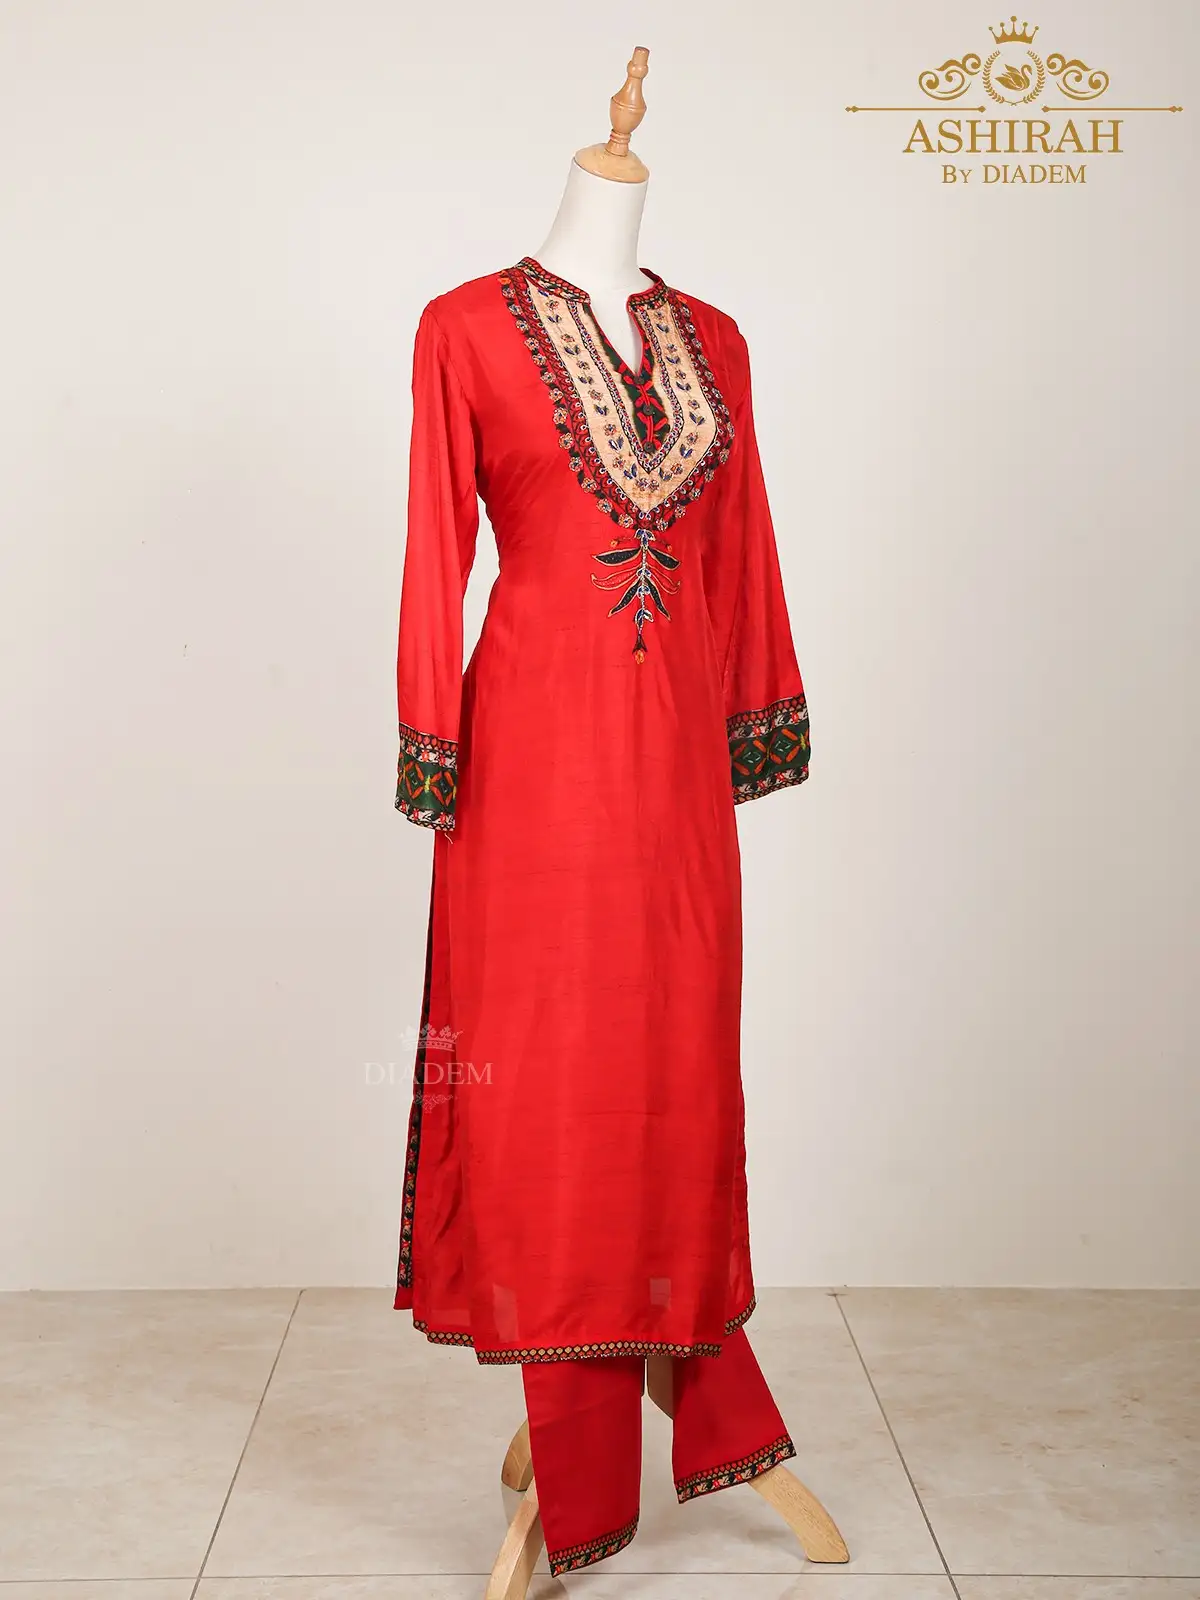 Red Straight Cut Suit Enhanced In Floral Prints And Beads